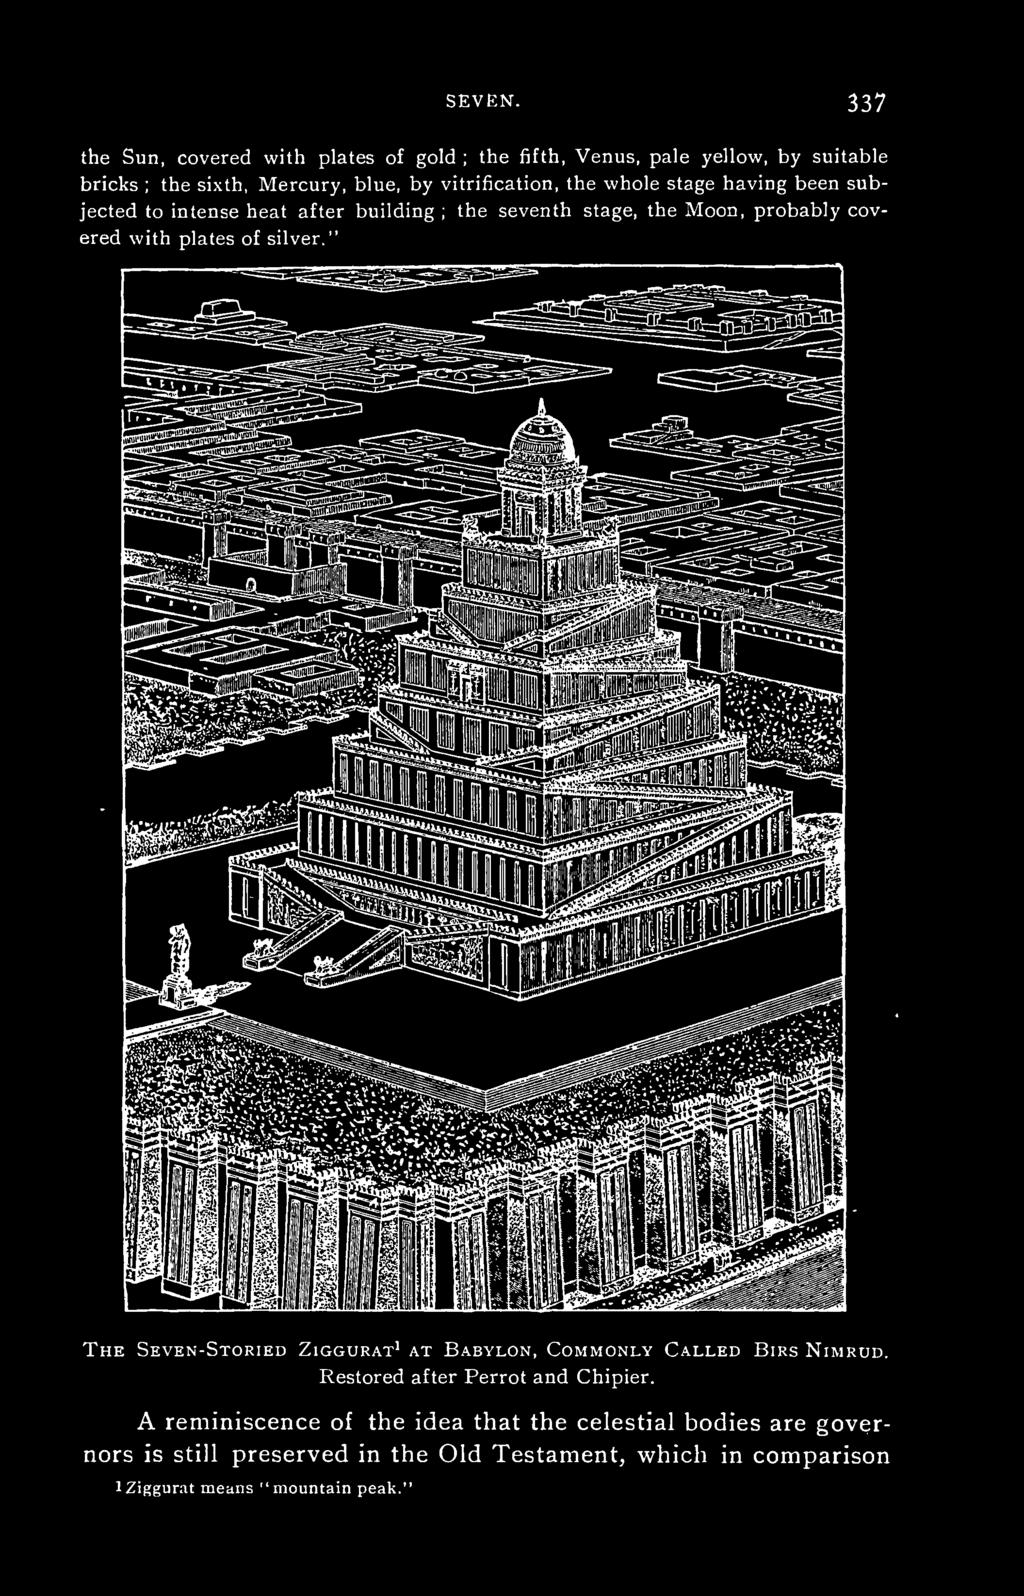 " seventh stage, the Moon, probably cov- The Seven-Storied Ziggurat^ at Babylon, Commonly